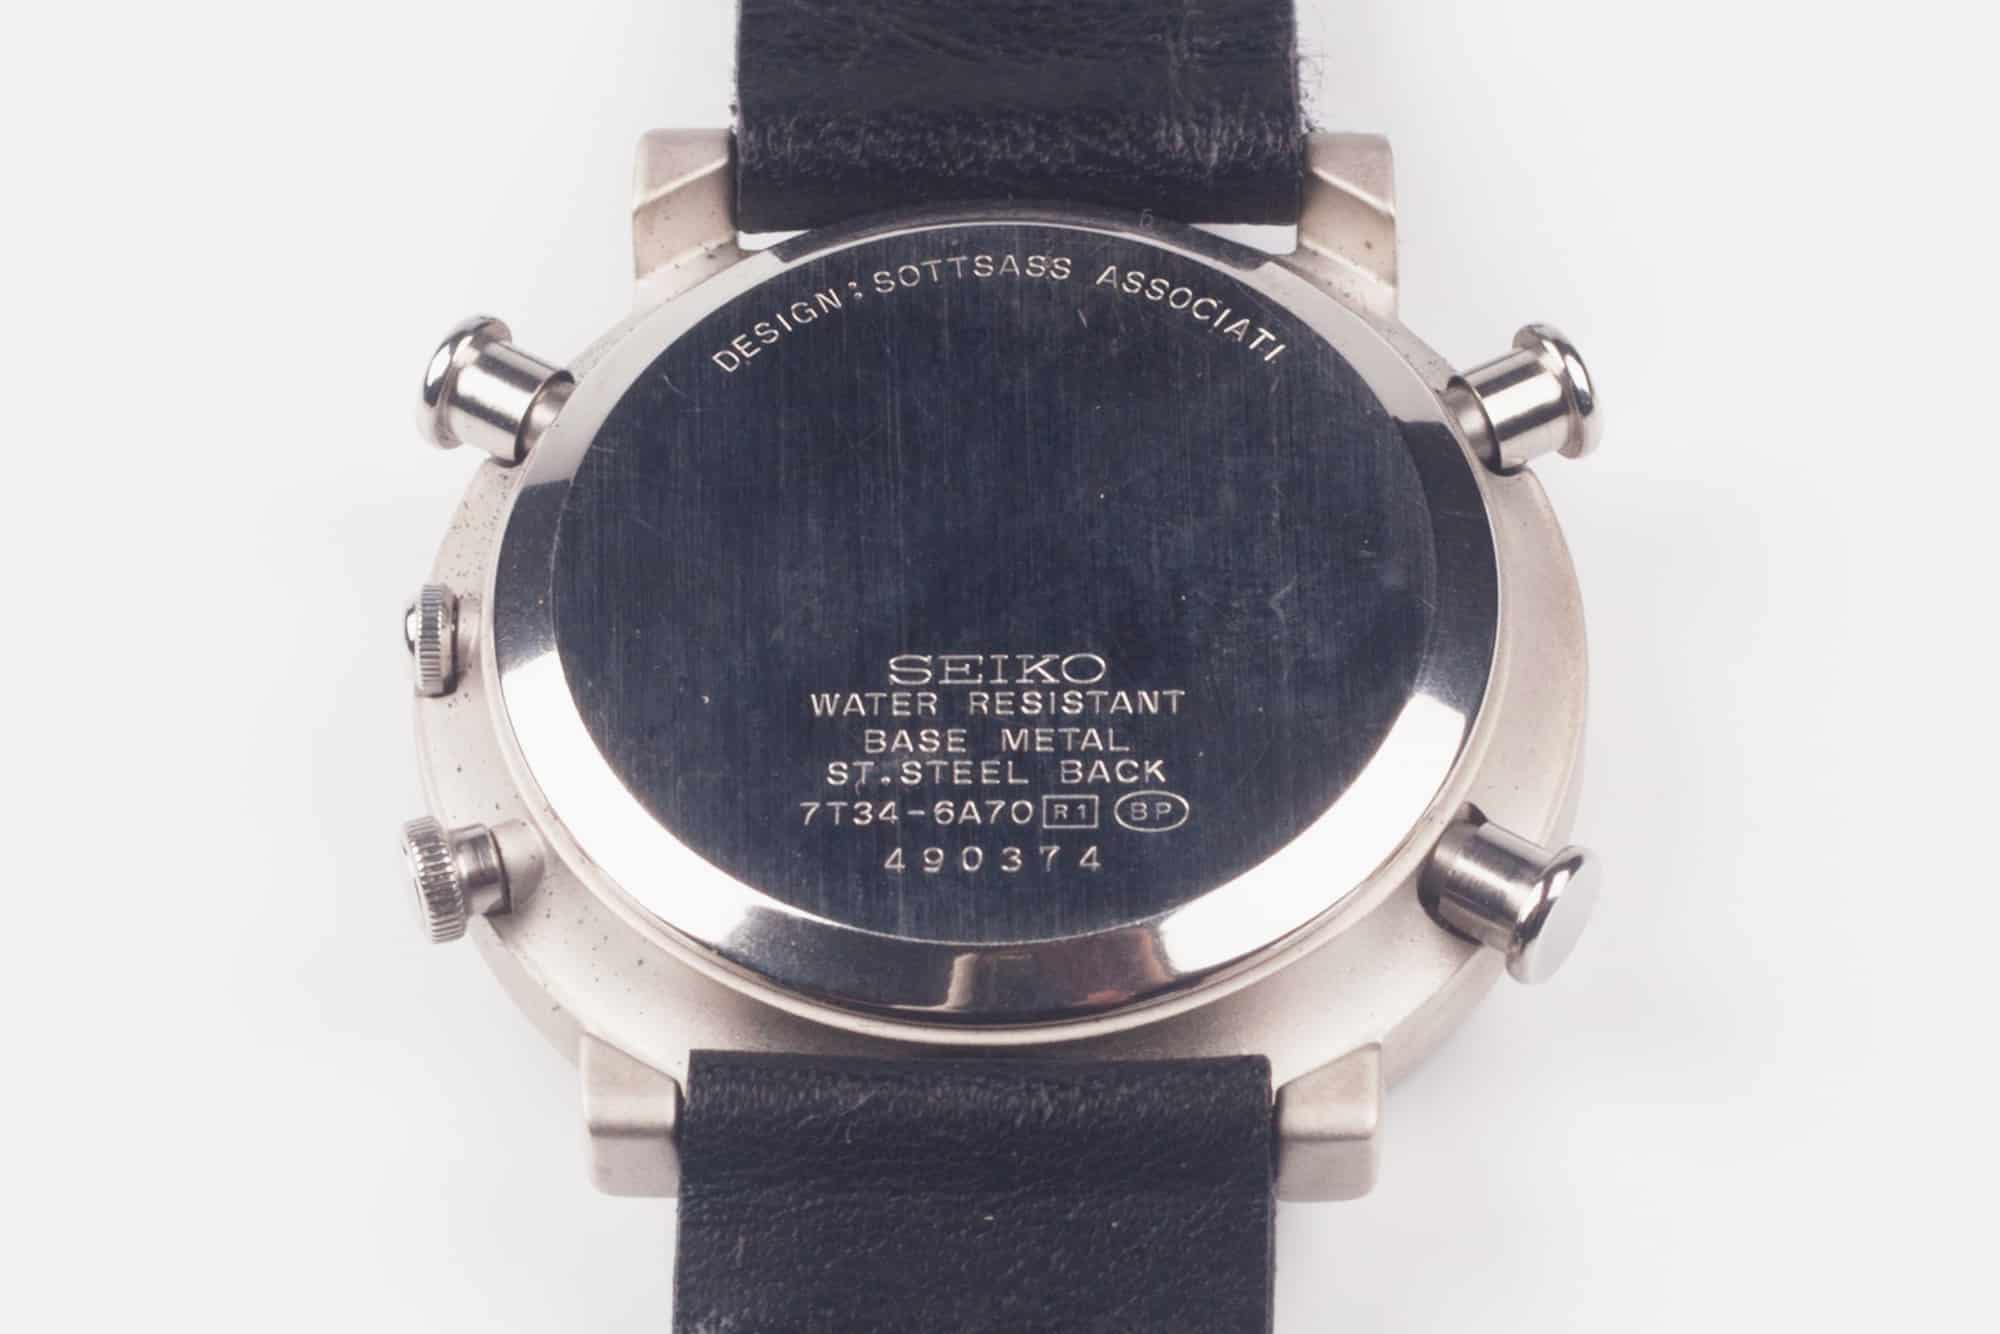 Up for Auction, Ultra-Rare Seikos by Italian Designer Ettore Sottsass -  Worn & Wound